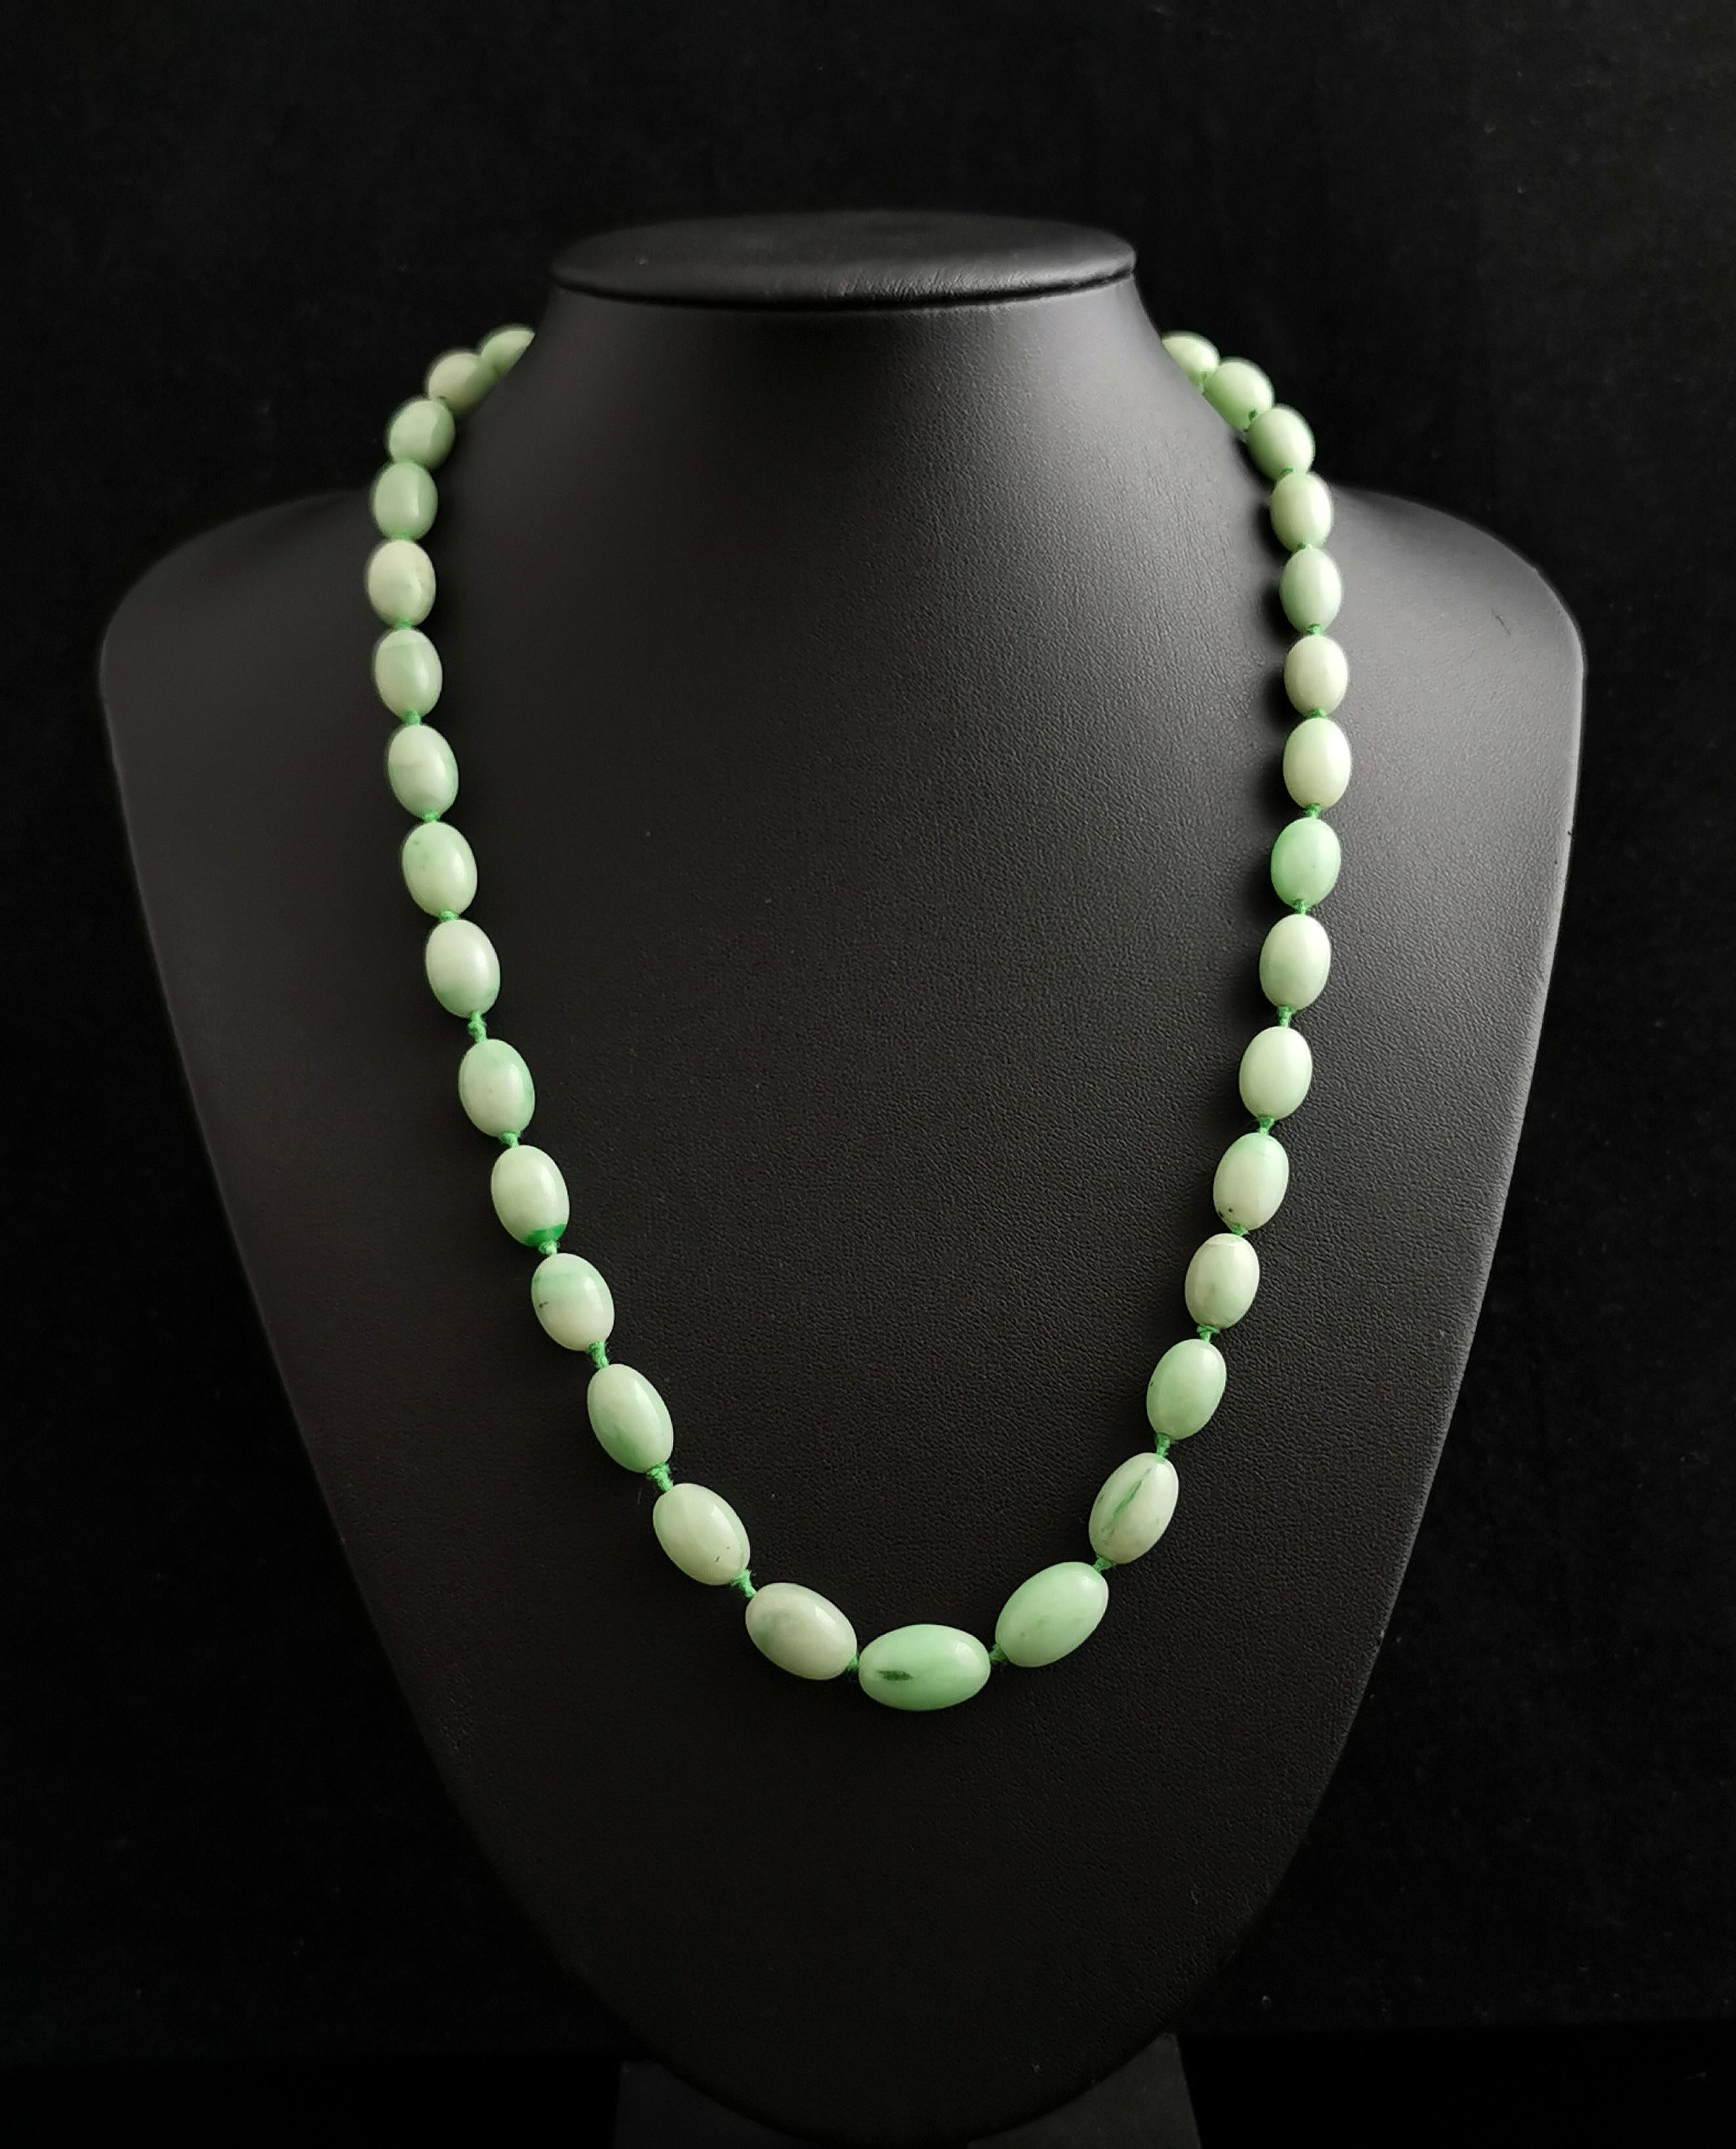 A beautiful vintage Art Deco era Jadeite Jade bead necklace.

Lovely minty green beads, with beautiful variations in the colourway from almost white to darker streaks and naturally occurring spots within, all delicately hand shaped and tightly